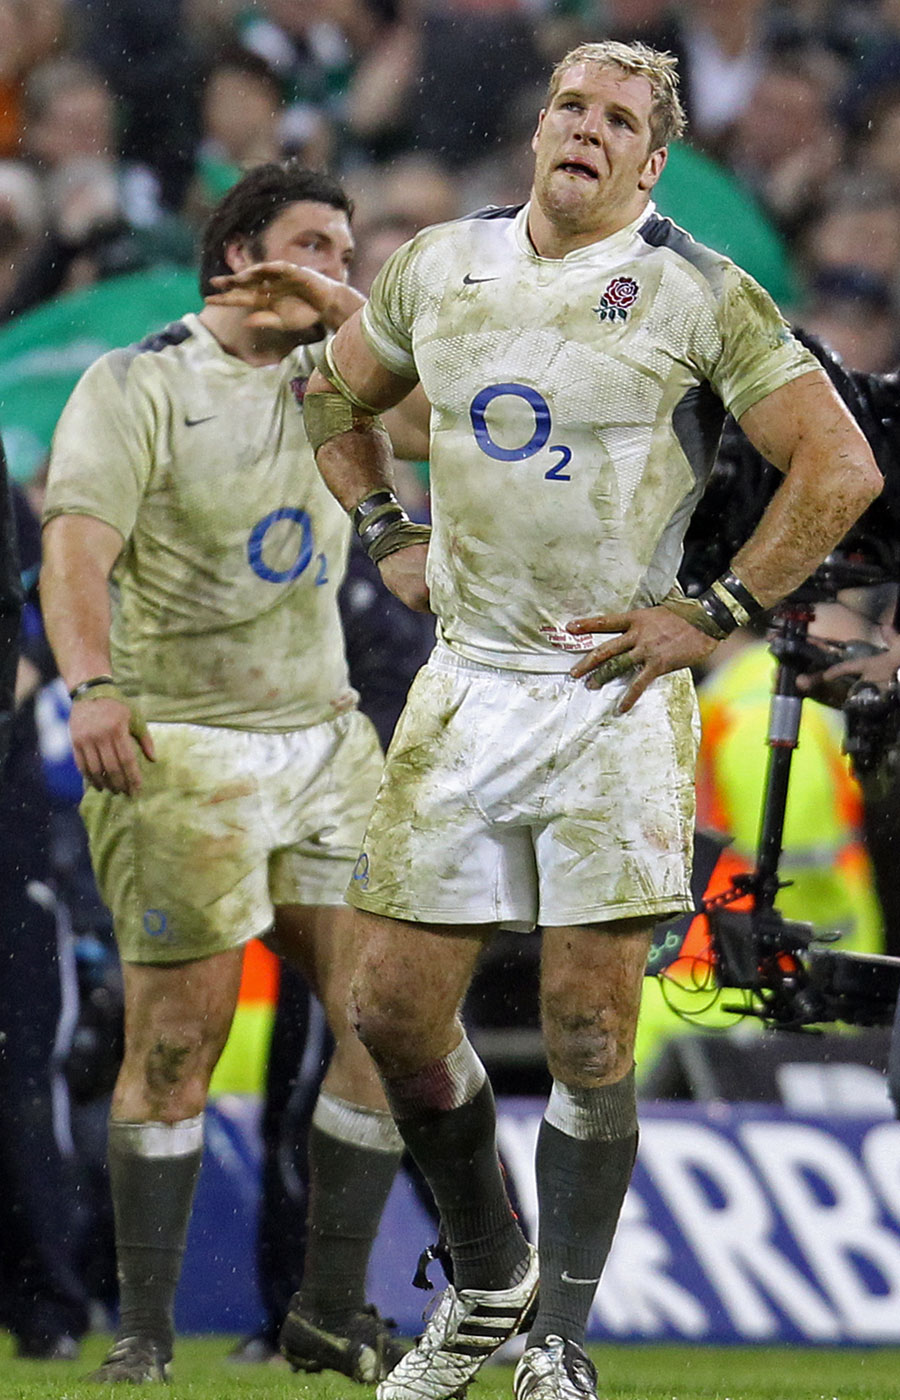 England's James Haskell reflects on the defeat to Ireland